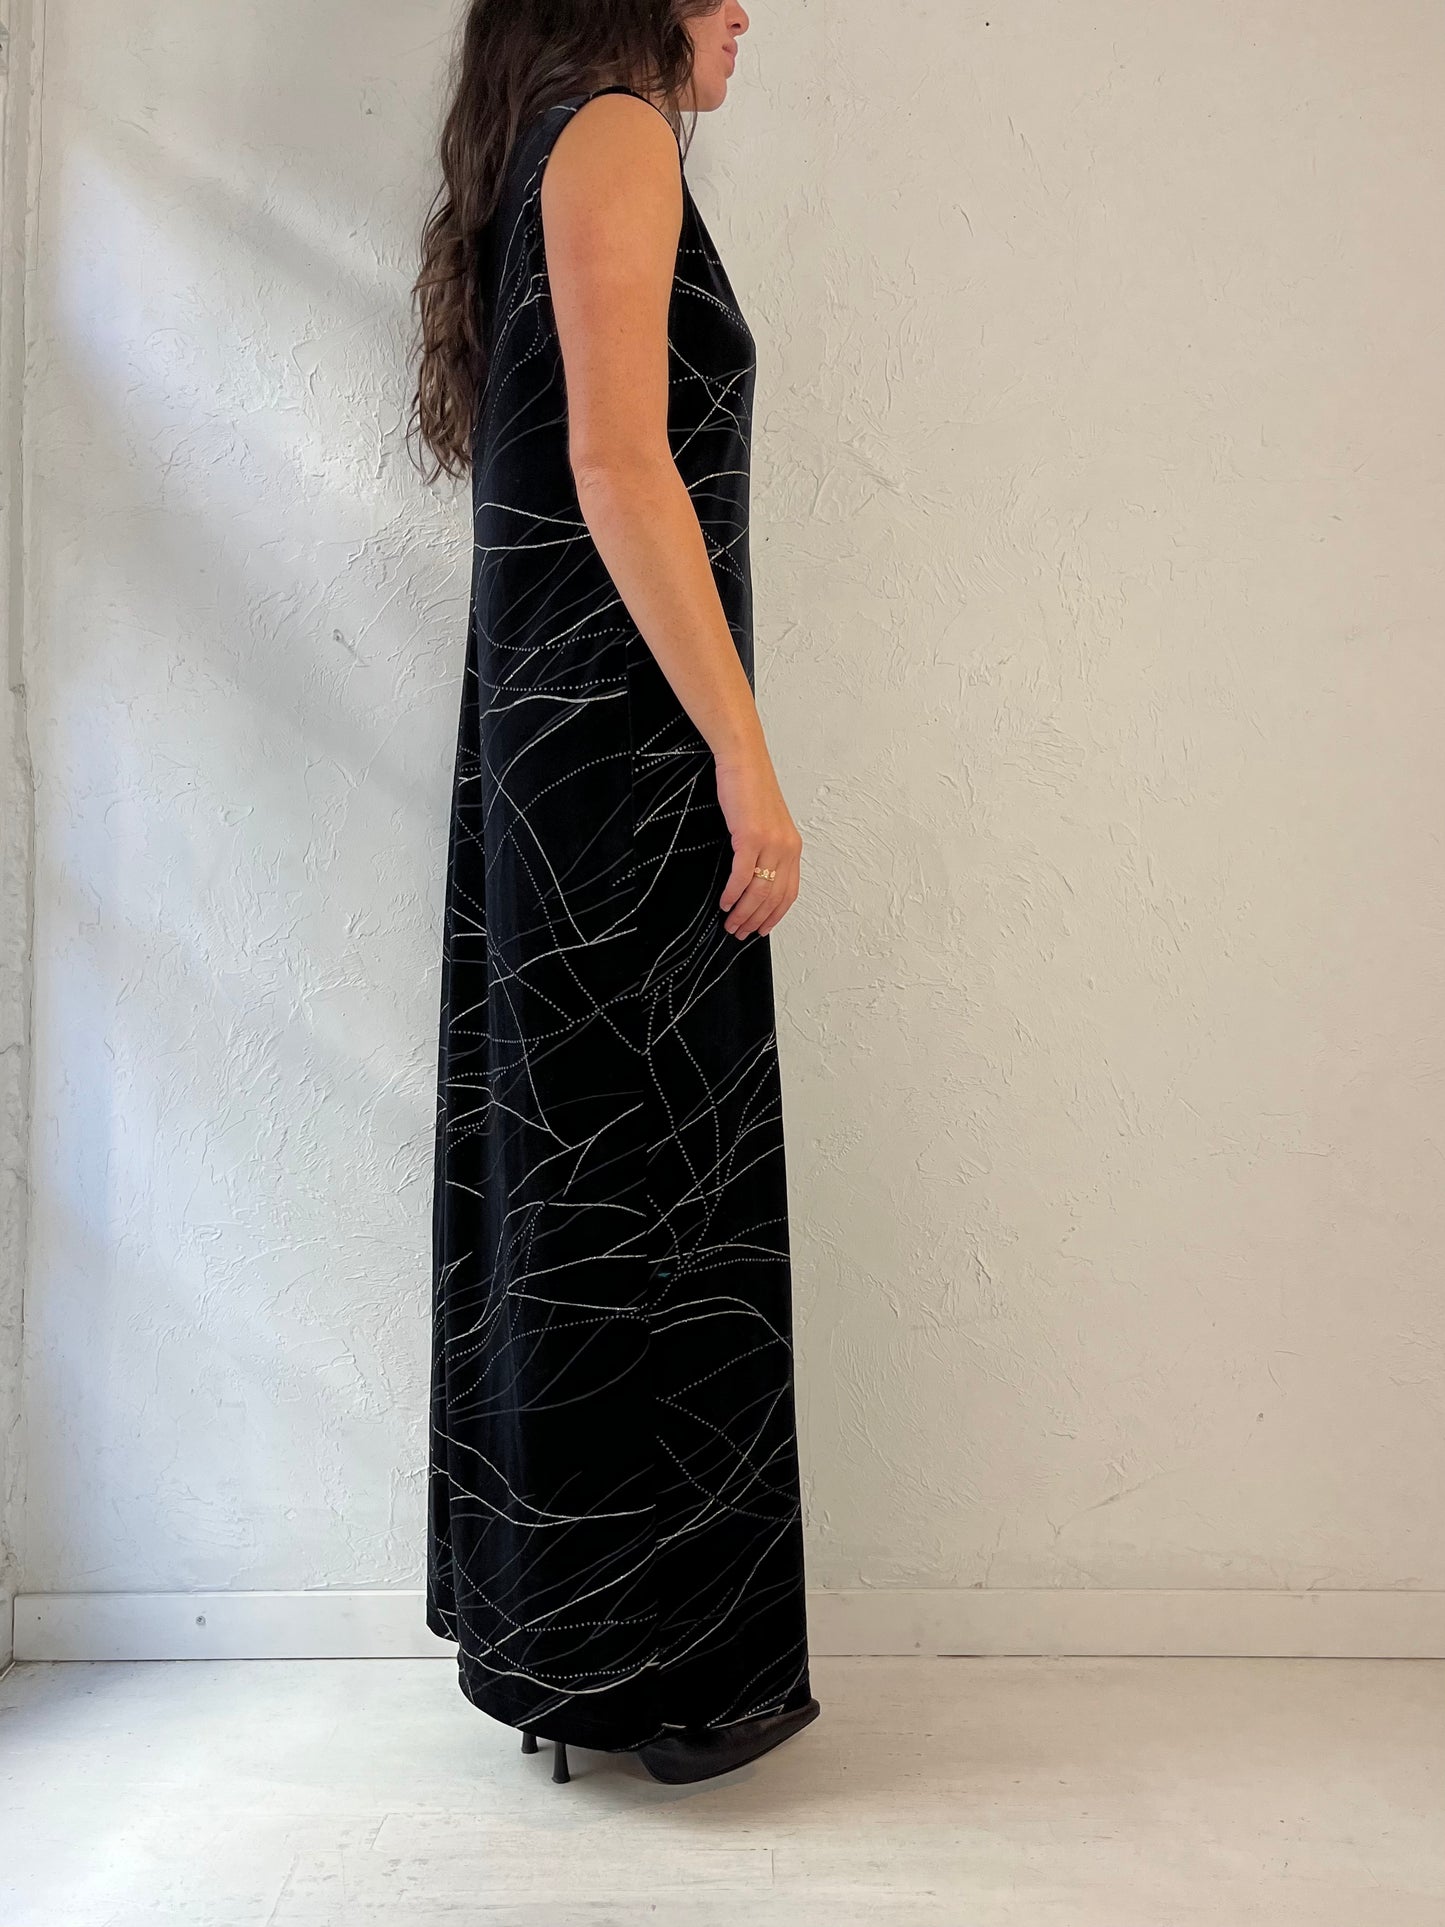 90s 'Robbie Bee' Black Sparkly Maxi Dress / Large